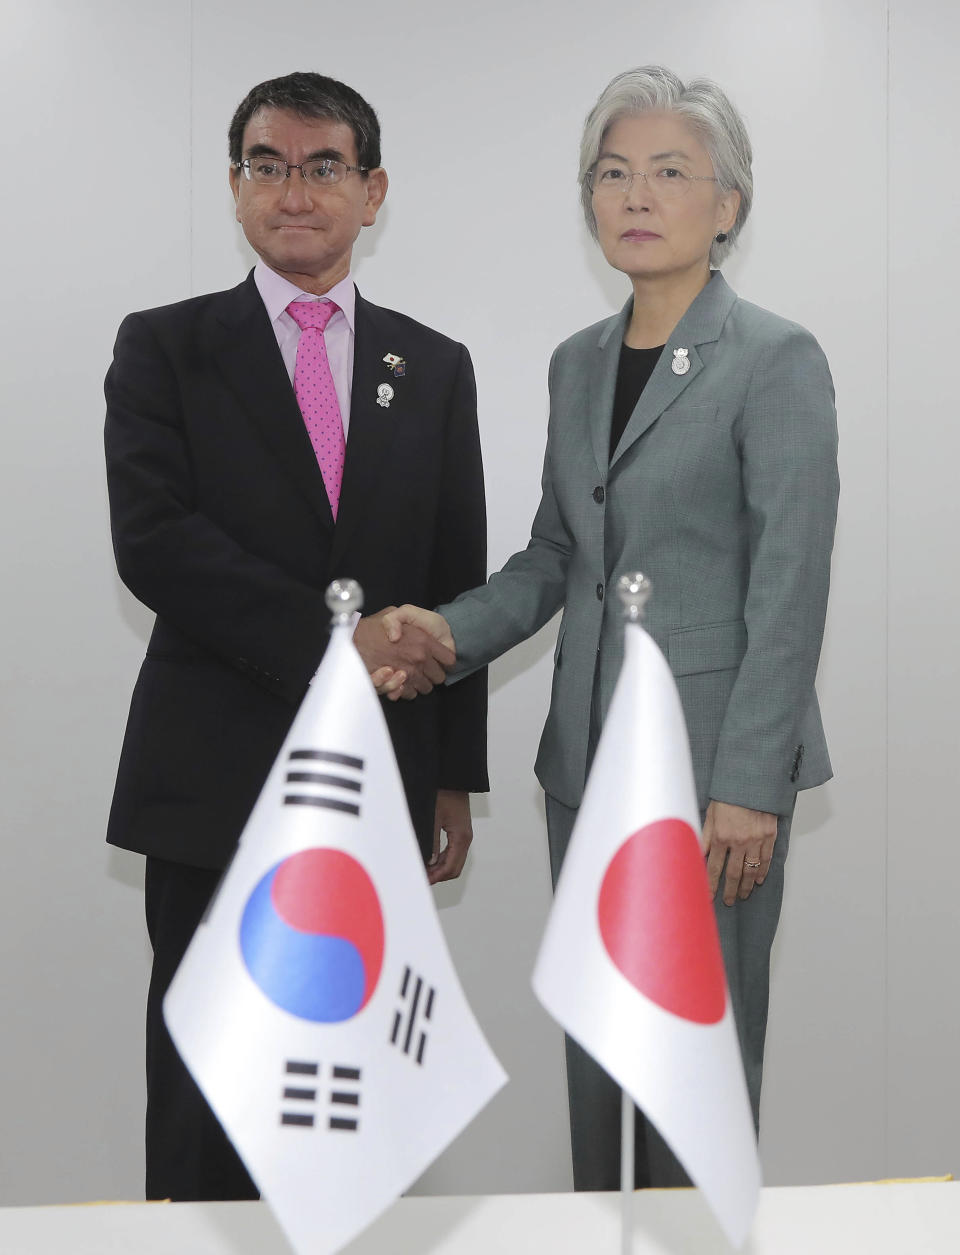 Japanese Foreign Minister Taro Kono, left, and his South Korean counterpart Kang Kyung-wha pose for a photo prior to a bilateral meeting on the sidelines of the ASEAN Foreign Ministers Meetings in Bangkok, Thailand, Thursday, Aug. 1, 2019. (Lee Jung-hoon/Yonhap via AP)